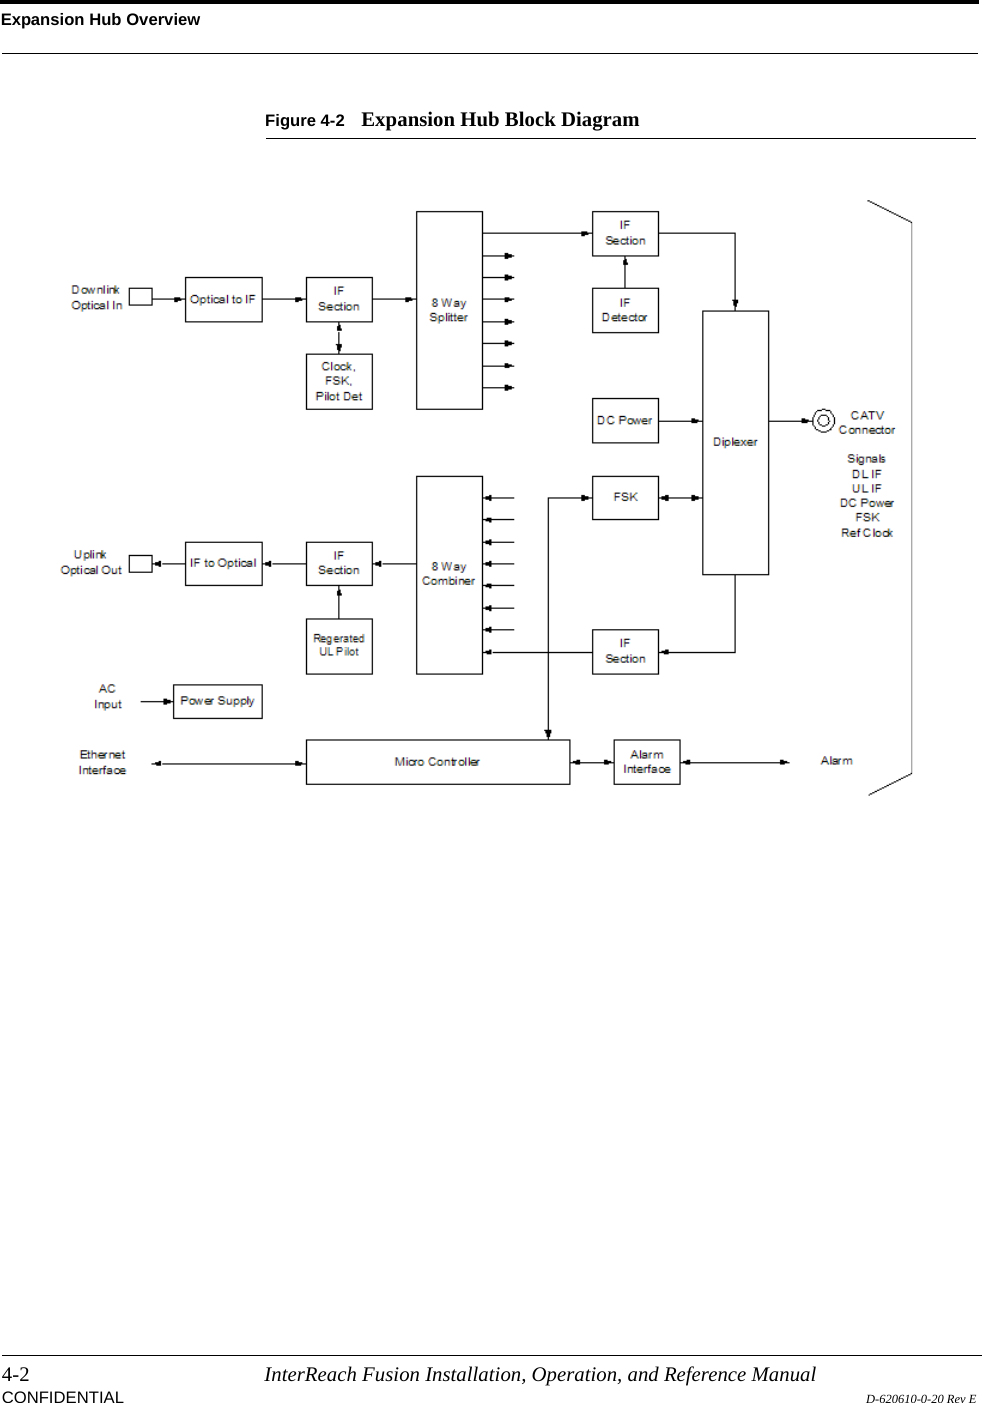 Expansion Hub Overview4-2 InterReach Fusion Installation, Operation, and Reference ManualCONFIDENTIAL D-620610-0-20 Rev EFigure 4-2 Expansion Hub Block Diagram